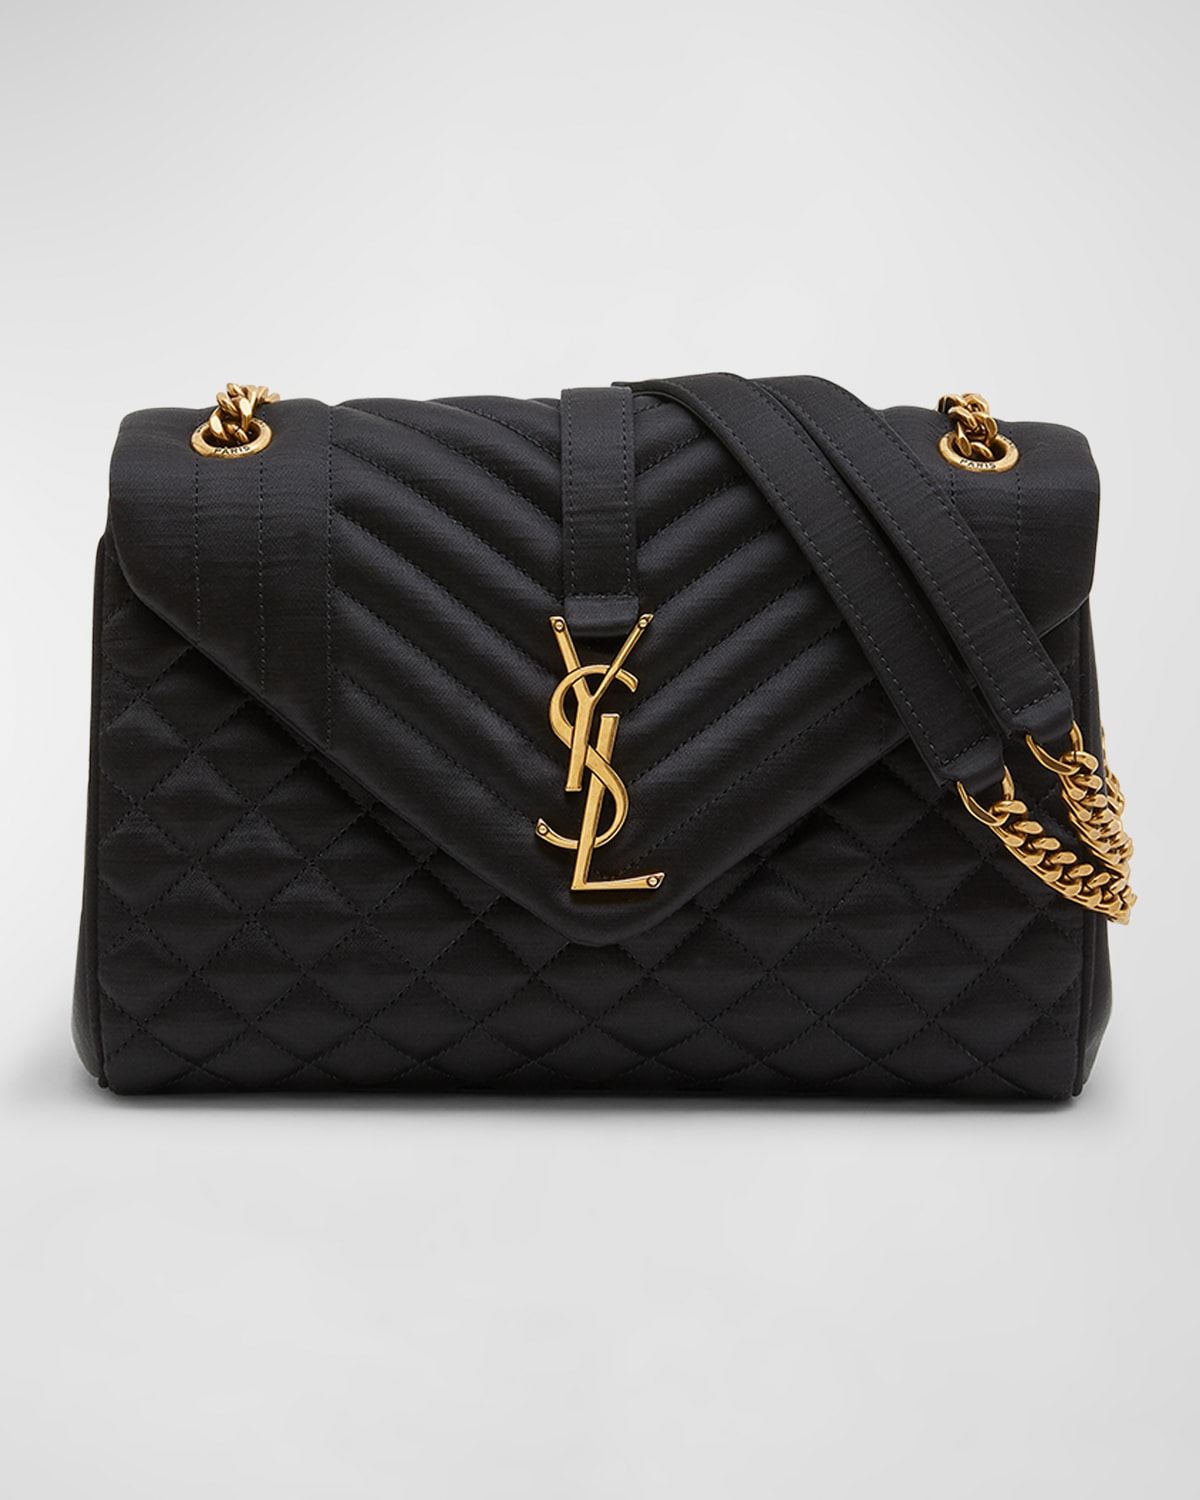 OVERVIEW* YSL Medium Envelope Triquilt! Compare to Coach, MK, Tory